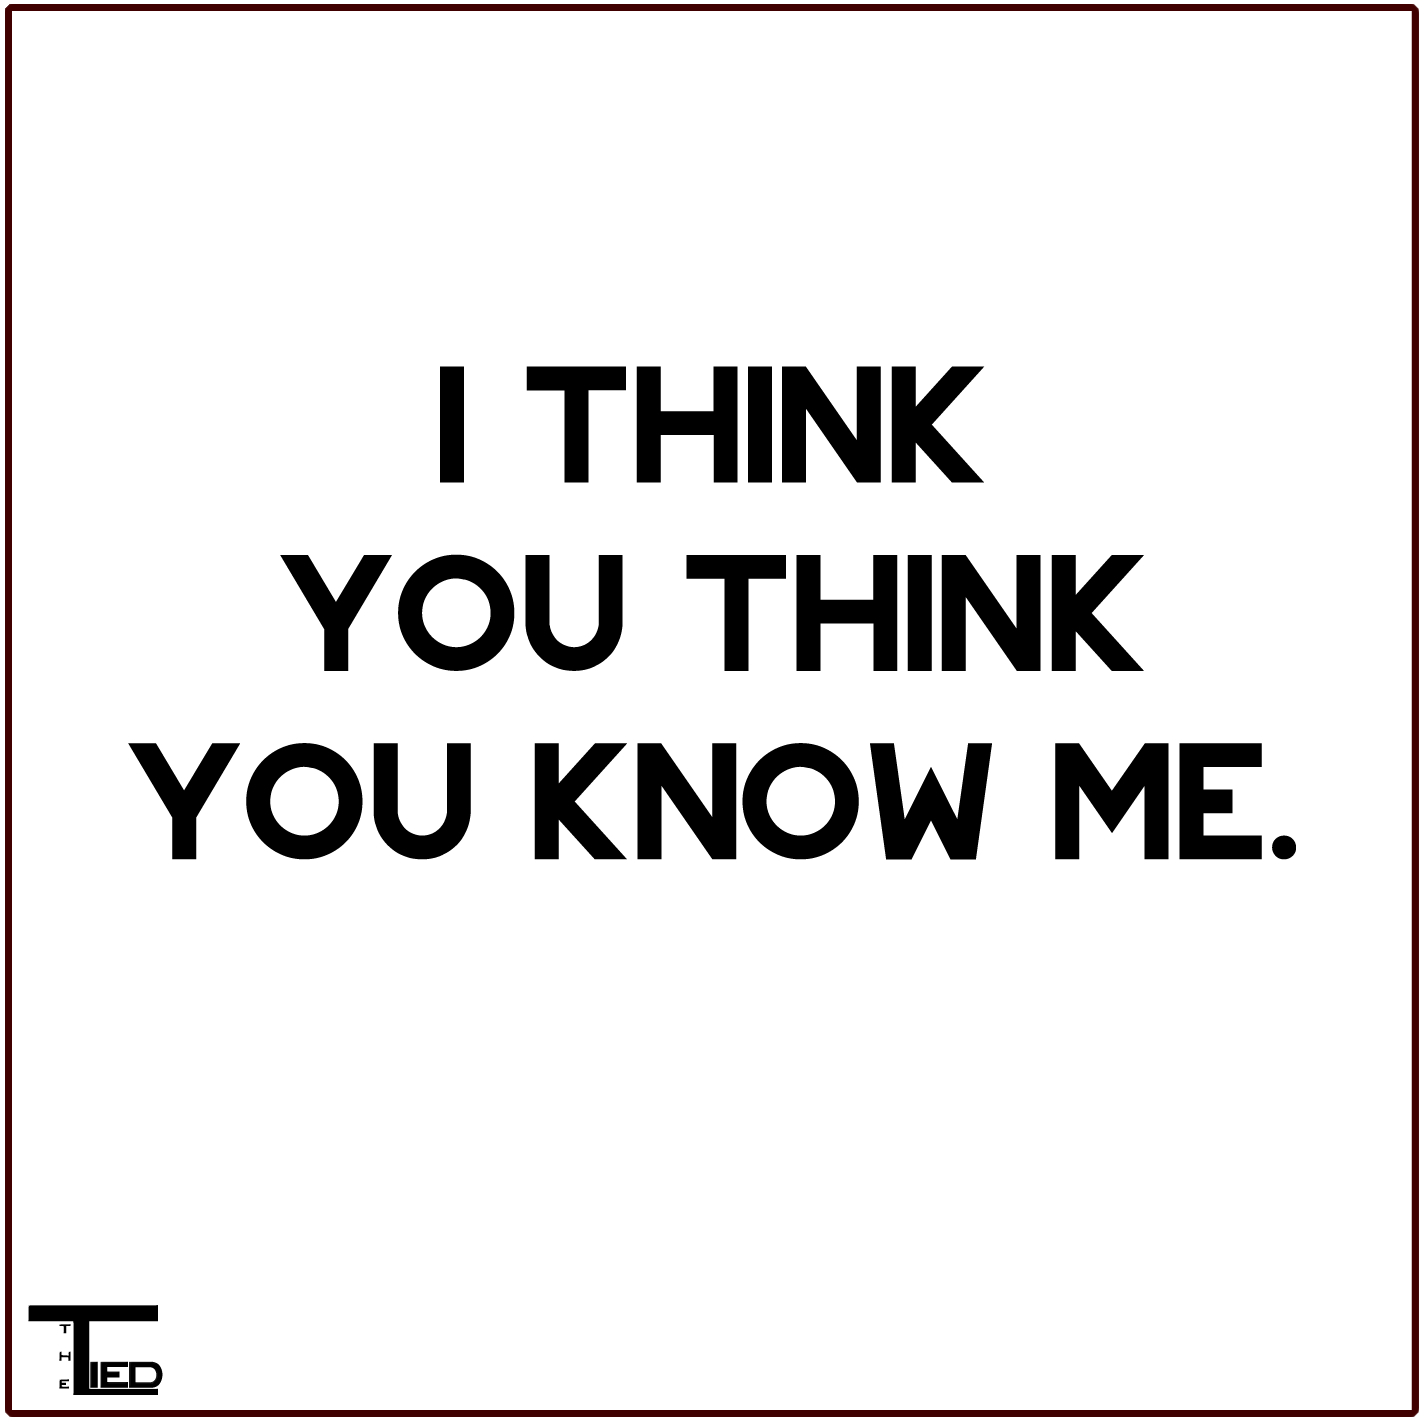 You think you know me? Think again.